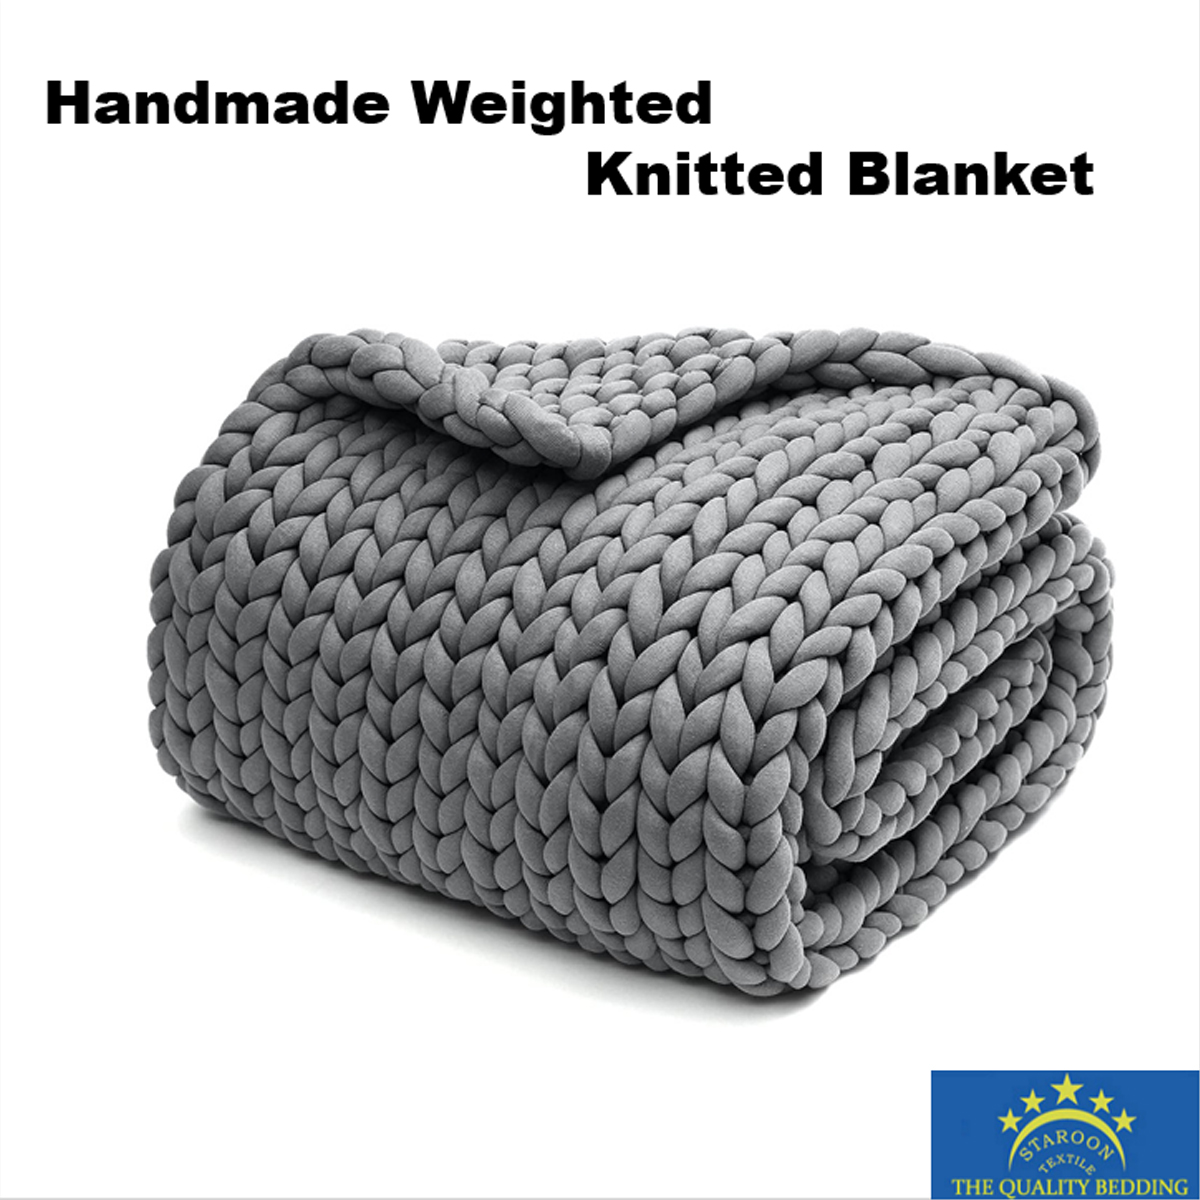 HANDMADE WEIGHTED KNITTED BLANKET